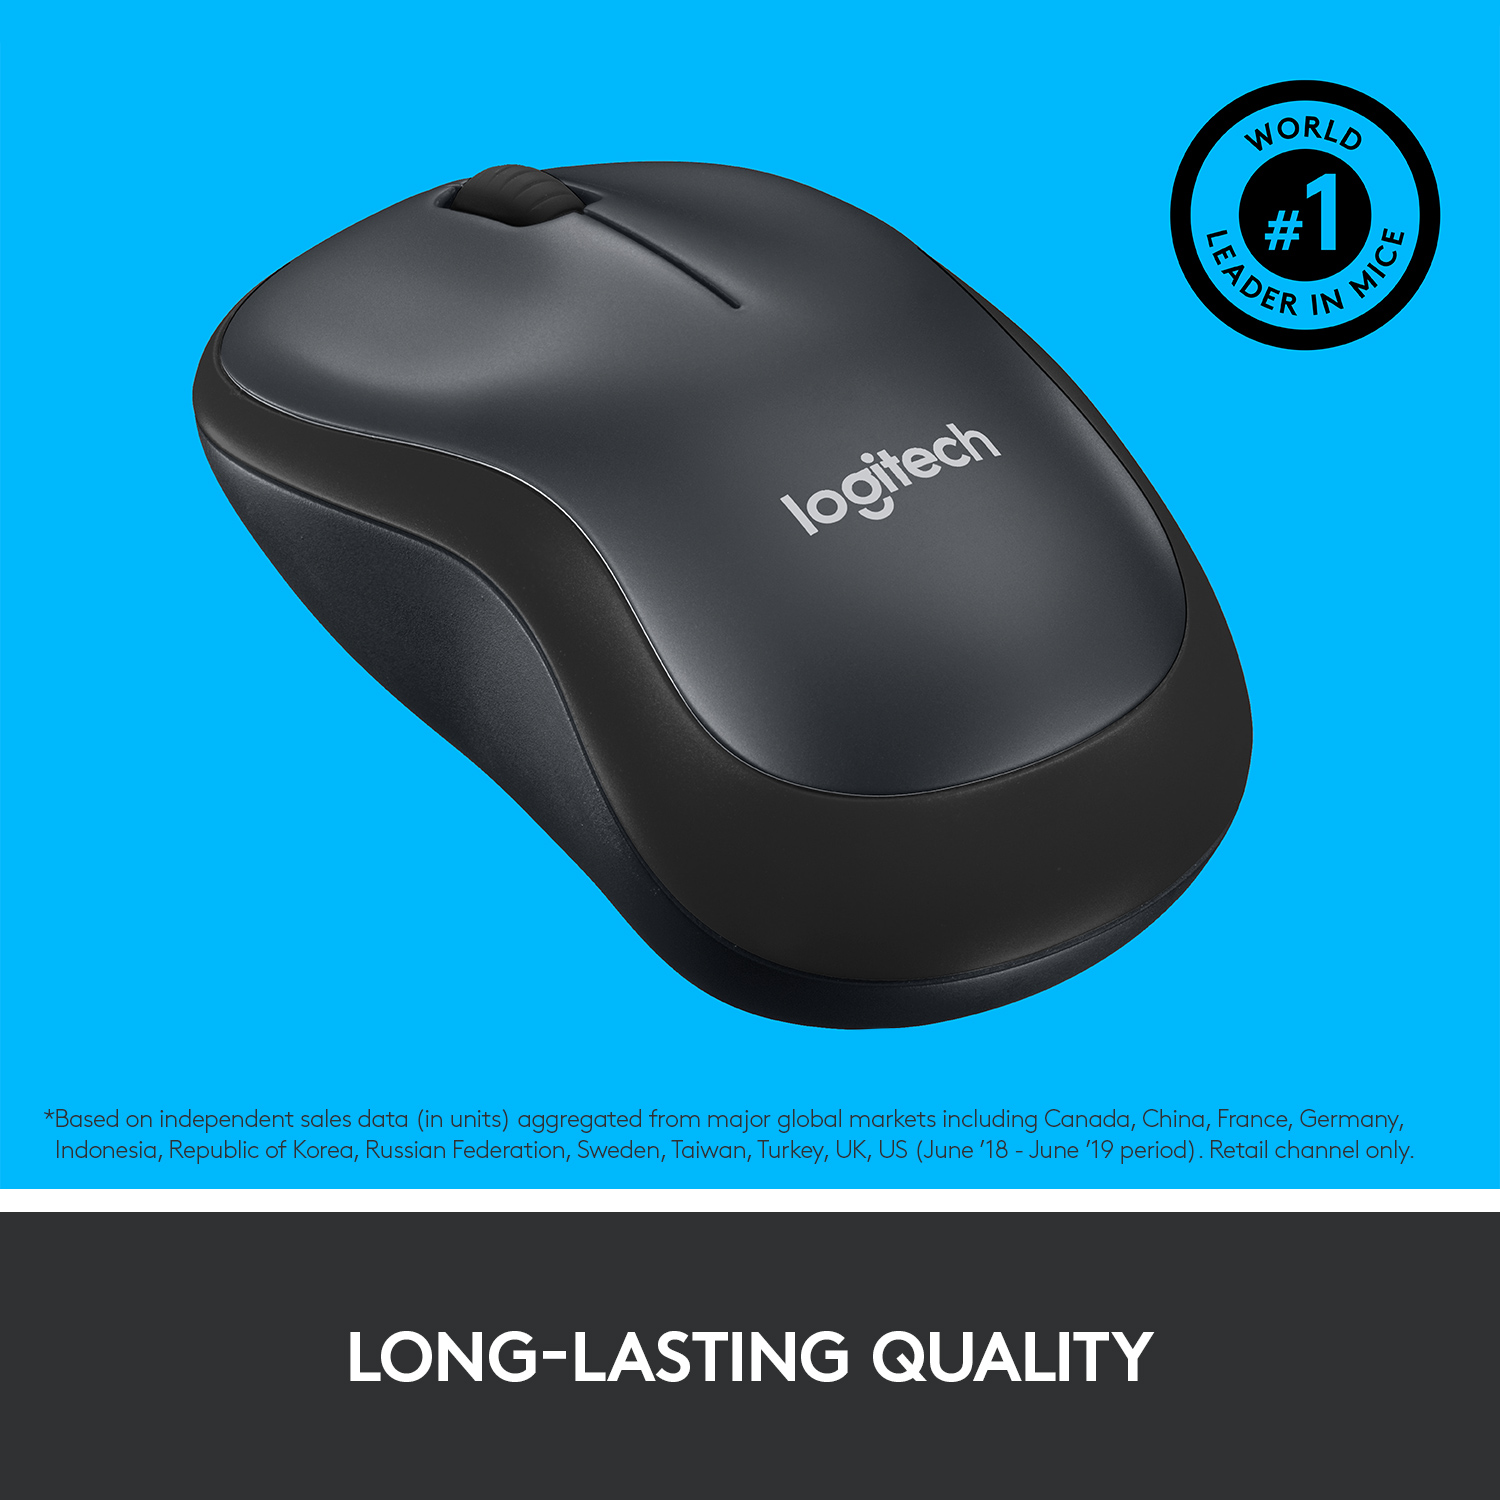 Logitech Silent Wireless Mouse, 2.4 GHz with USB Receiver, 1000 DPI Optical Tracking, Black - image 3 of 9